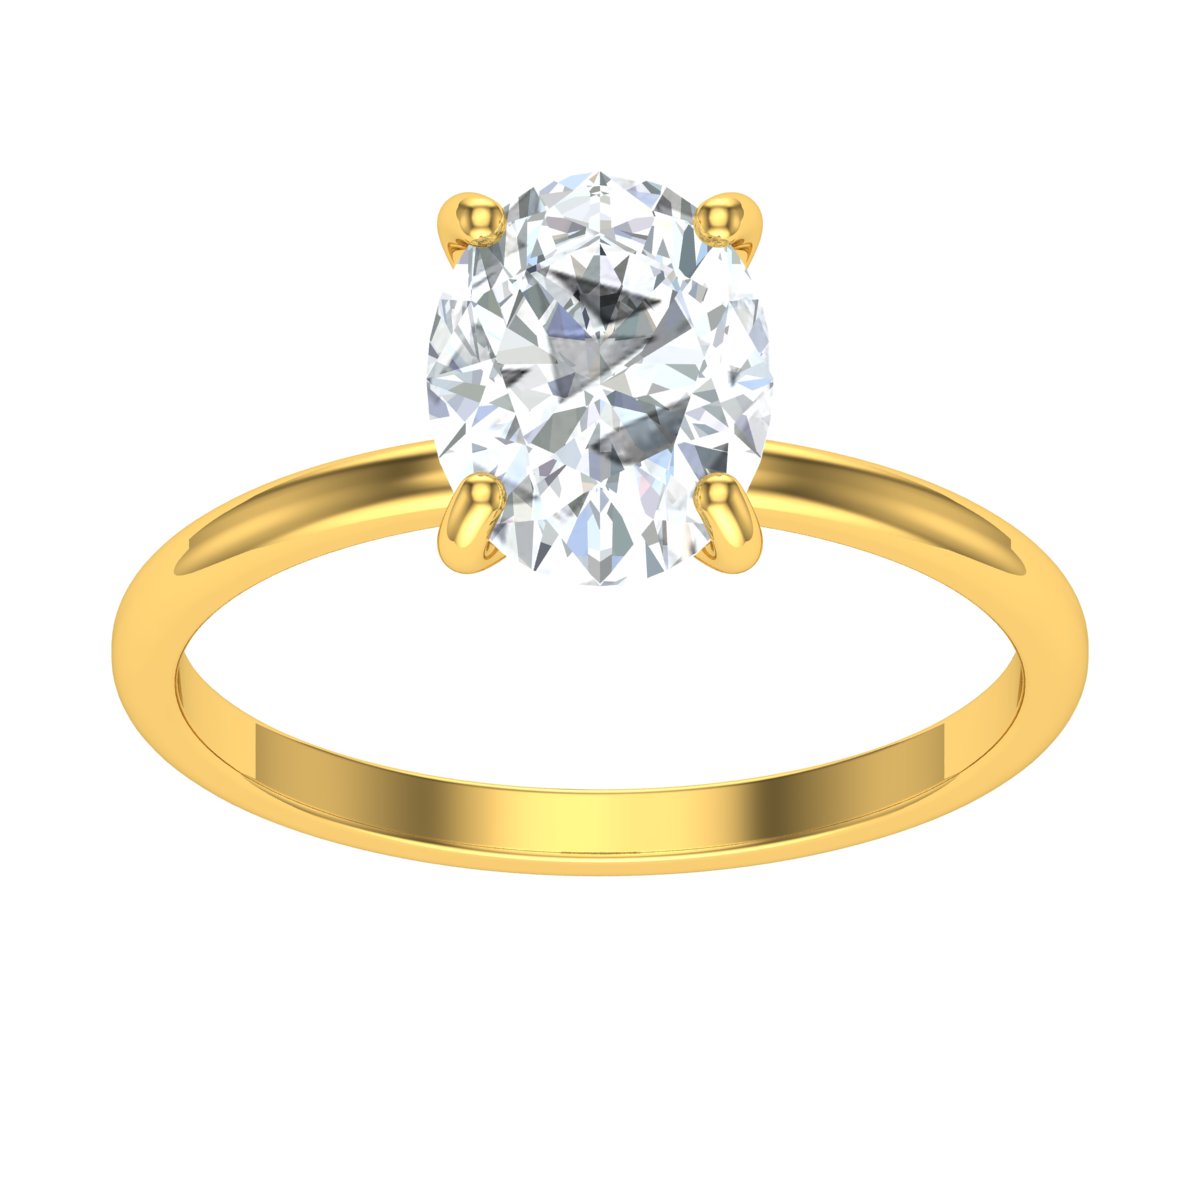 14K Solid Gold Ring 2 ct Oval Cut Moissanite Diamond Wedding Ring